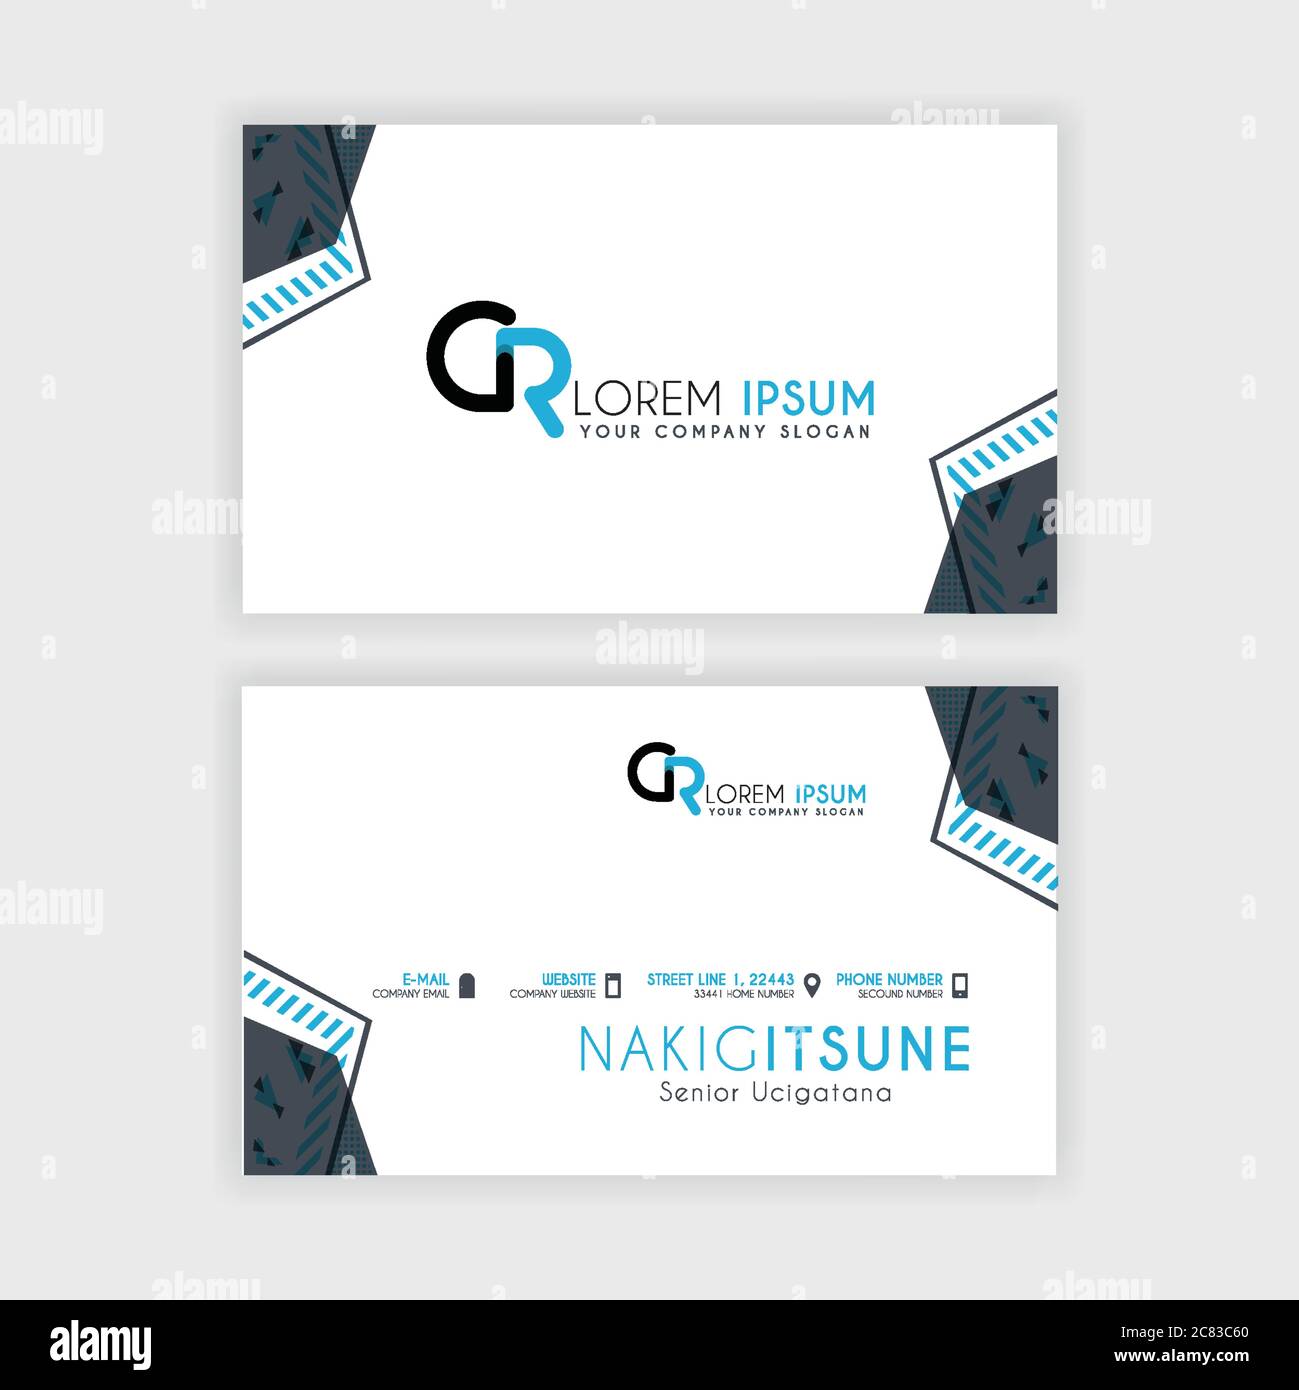 Simple Business Card with initial letter CR rounded edges with a blue and gray corner decoration. Stock Vector